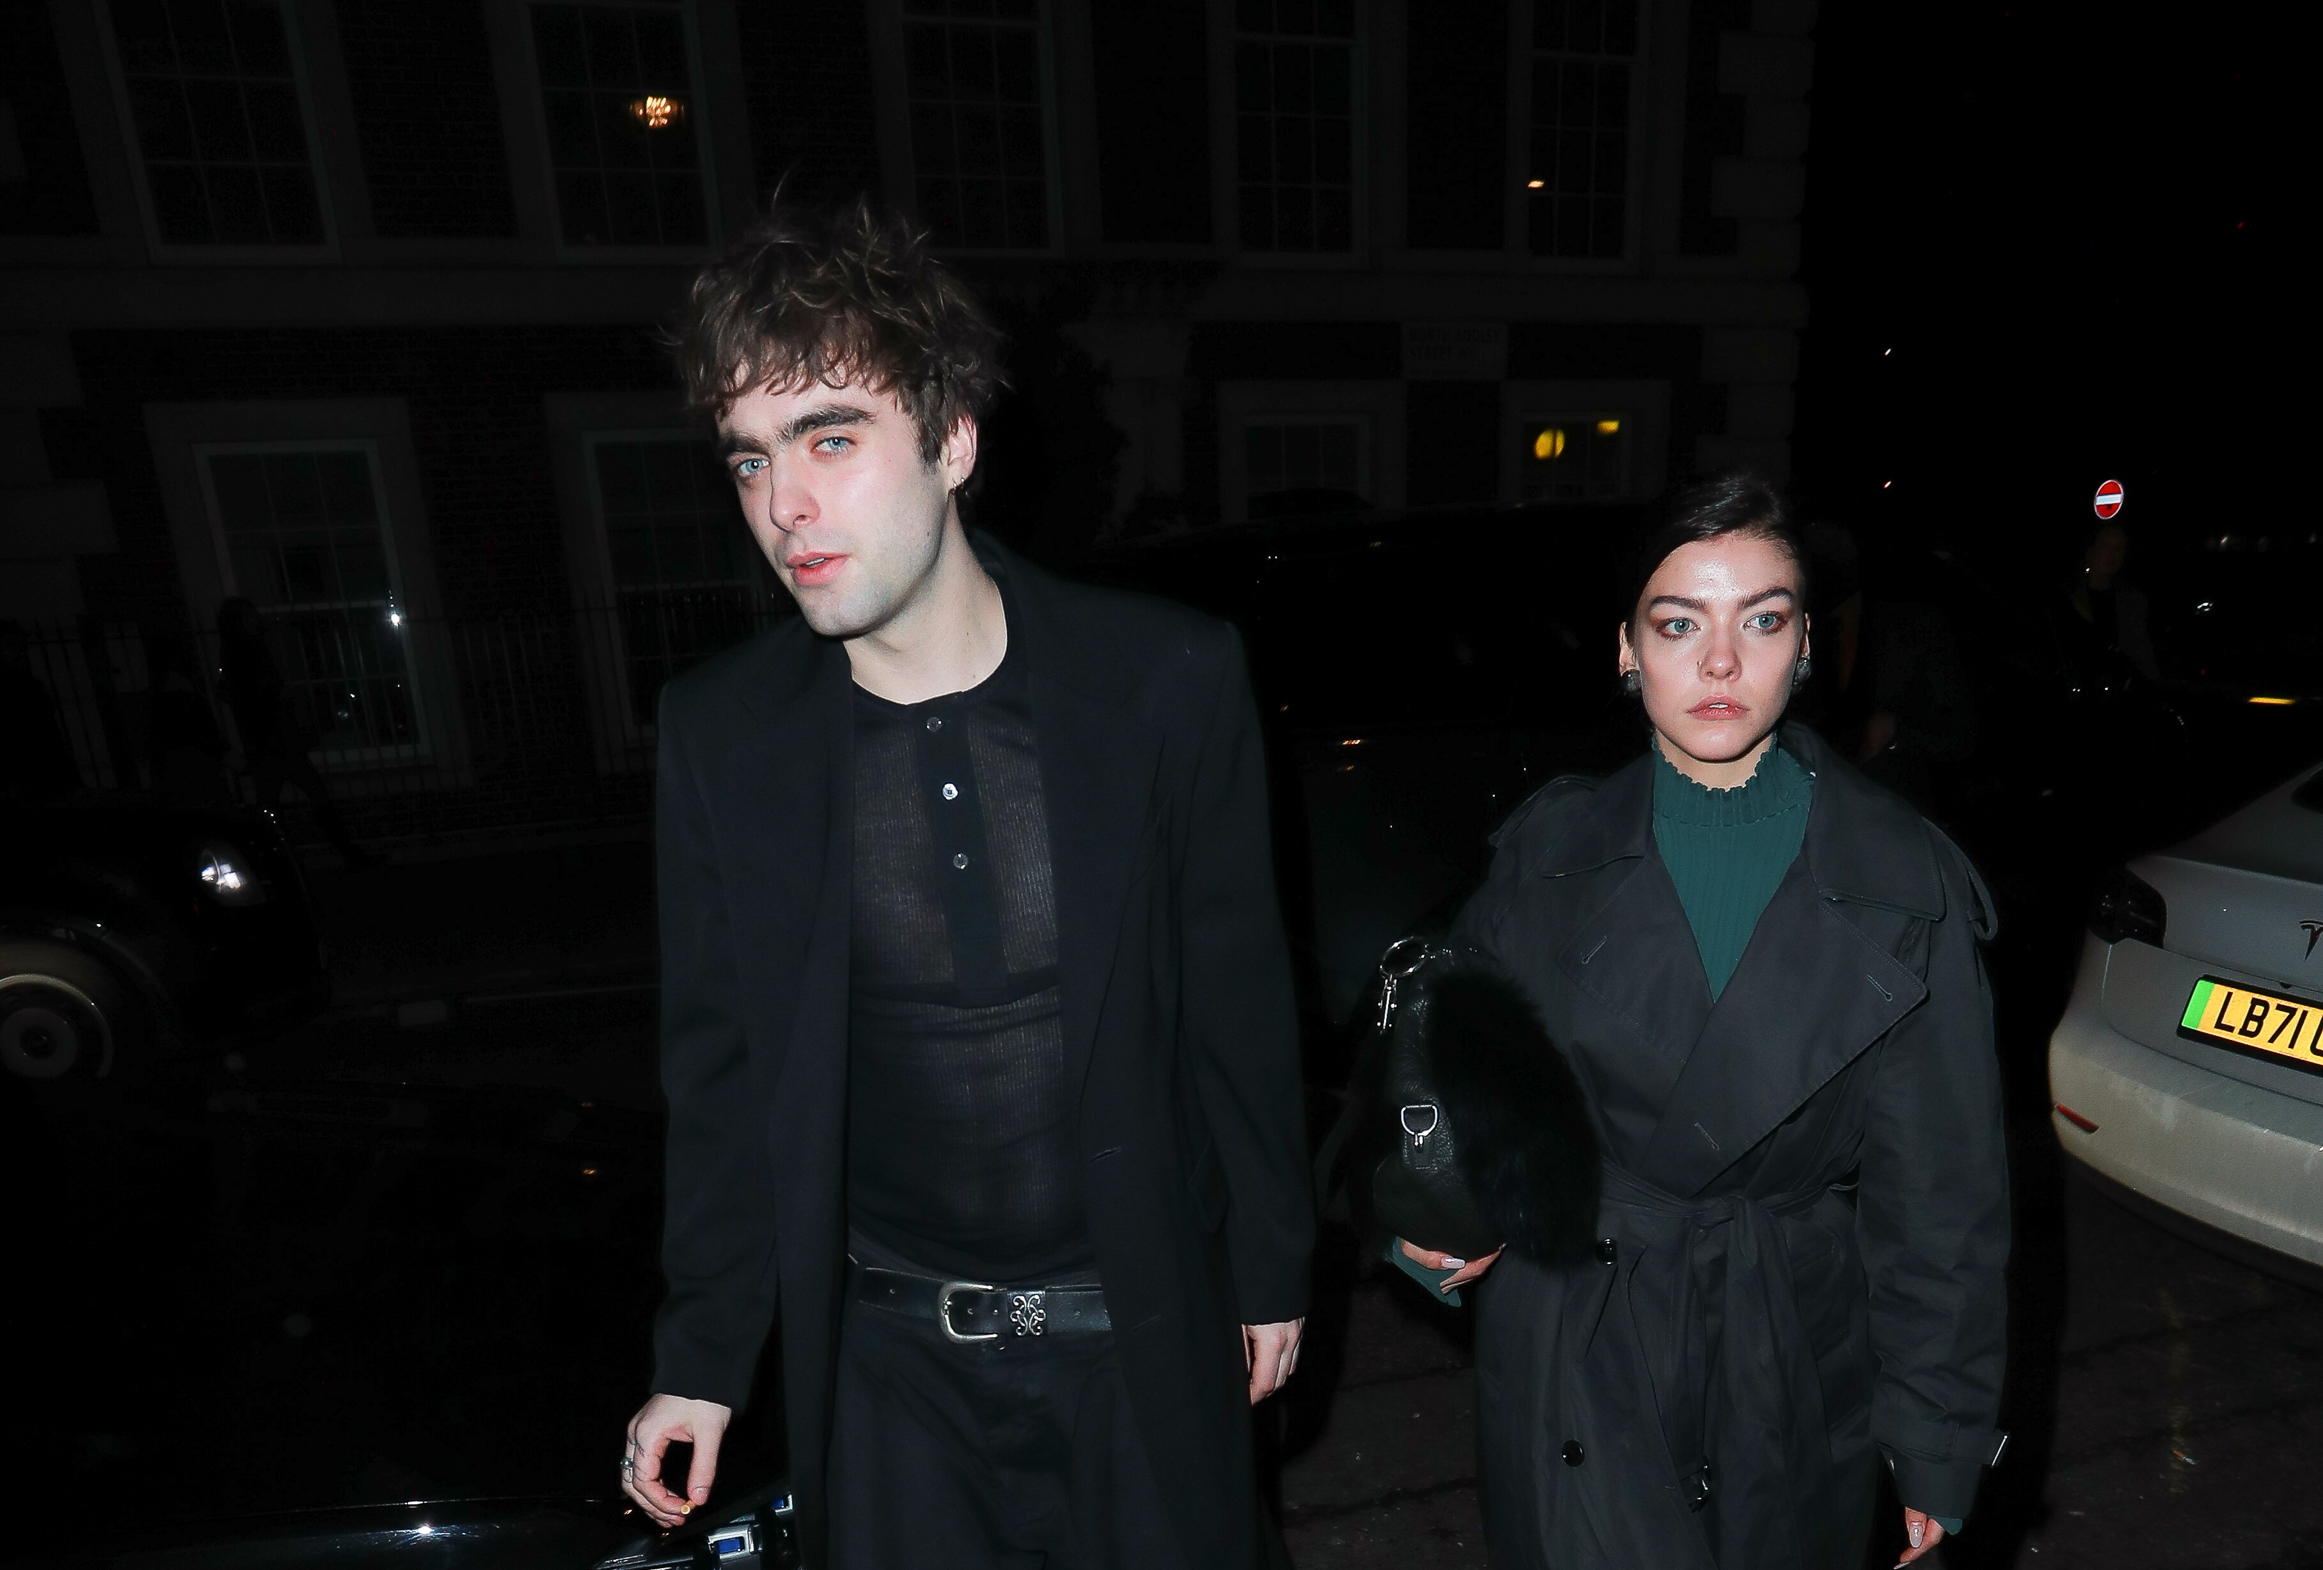 Lennon Gallagher and Isobel Richmond walking together at night, attending the Burberry Winter 2024 show after party during London Fashion Week. Lennon wears an all-black ensemble with a sheer top under a blazer, while Isobel sports a green turtleneck under a black trench coat.